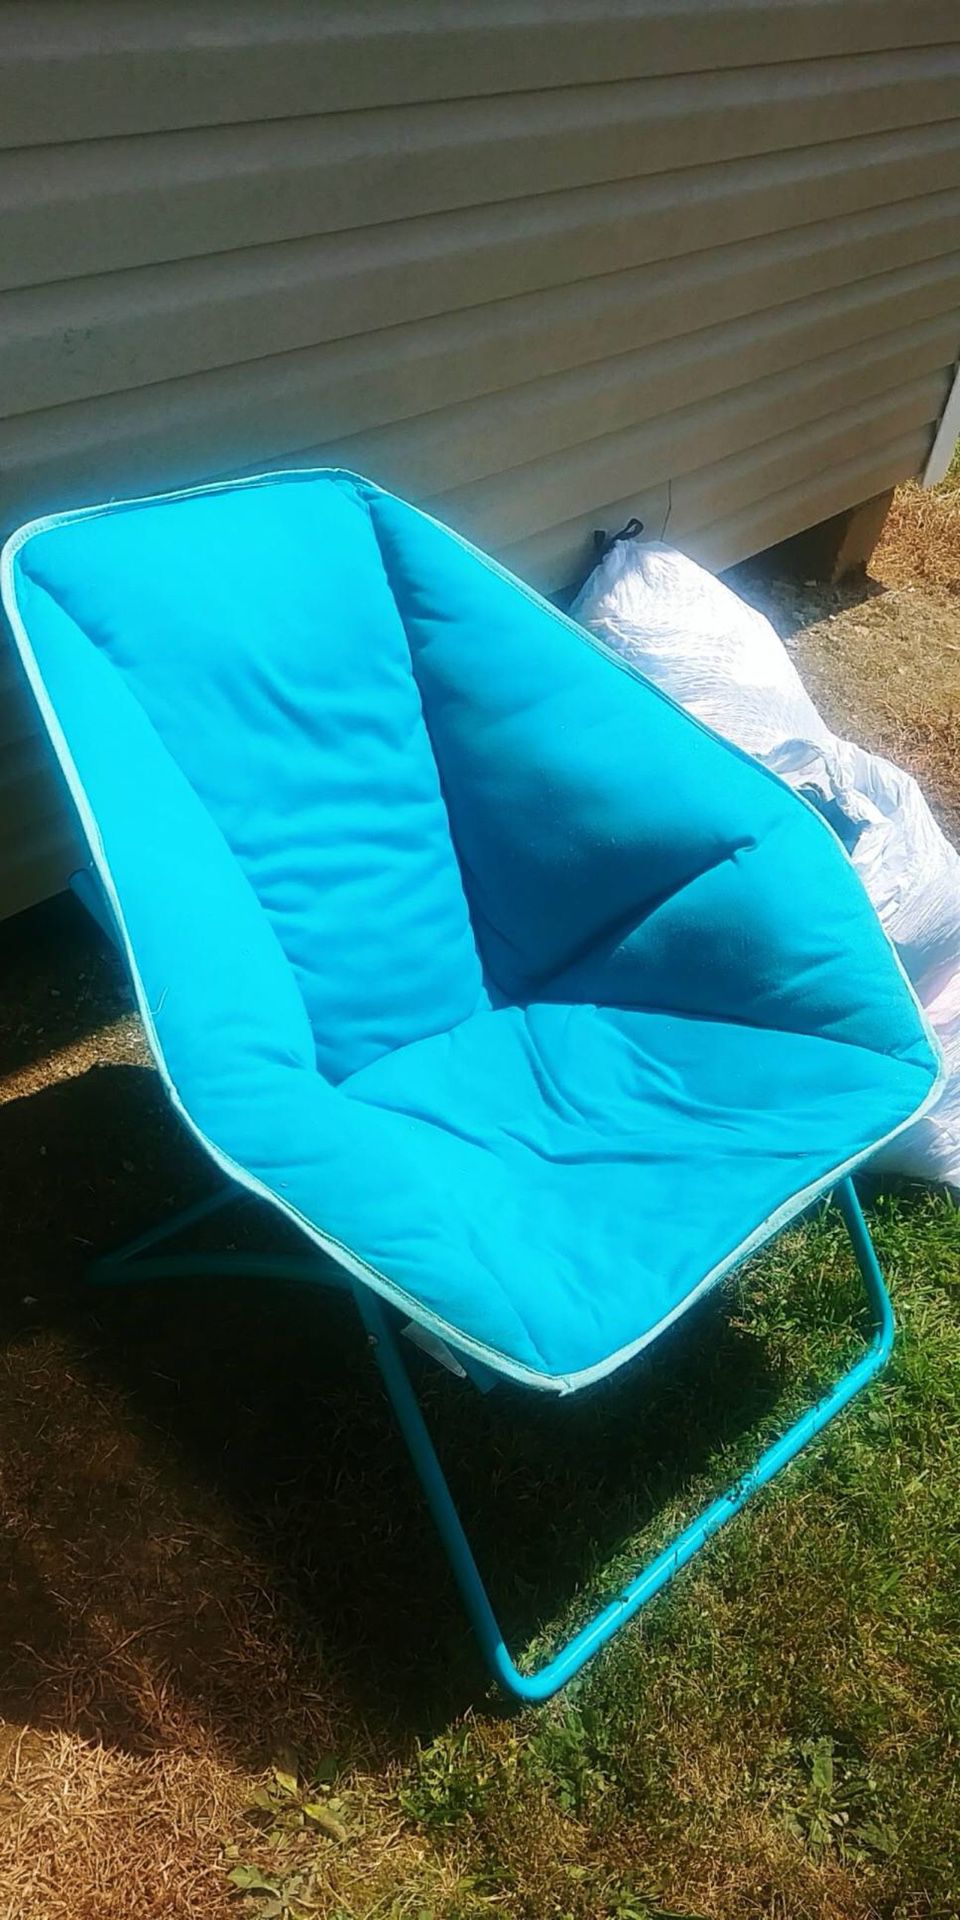 Foldable saucer chair, like new never used